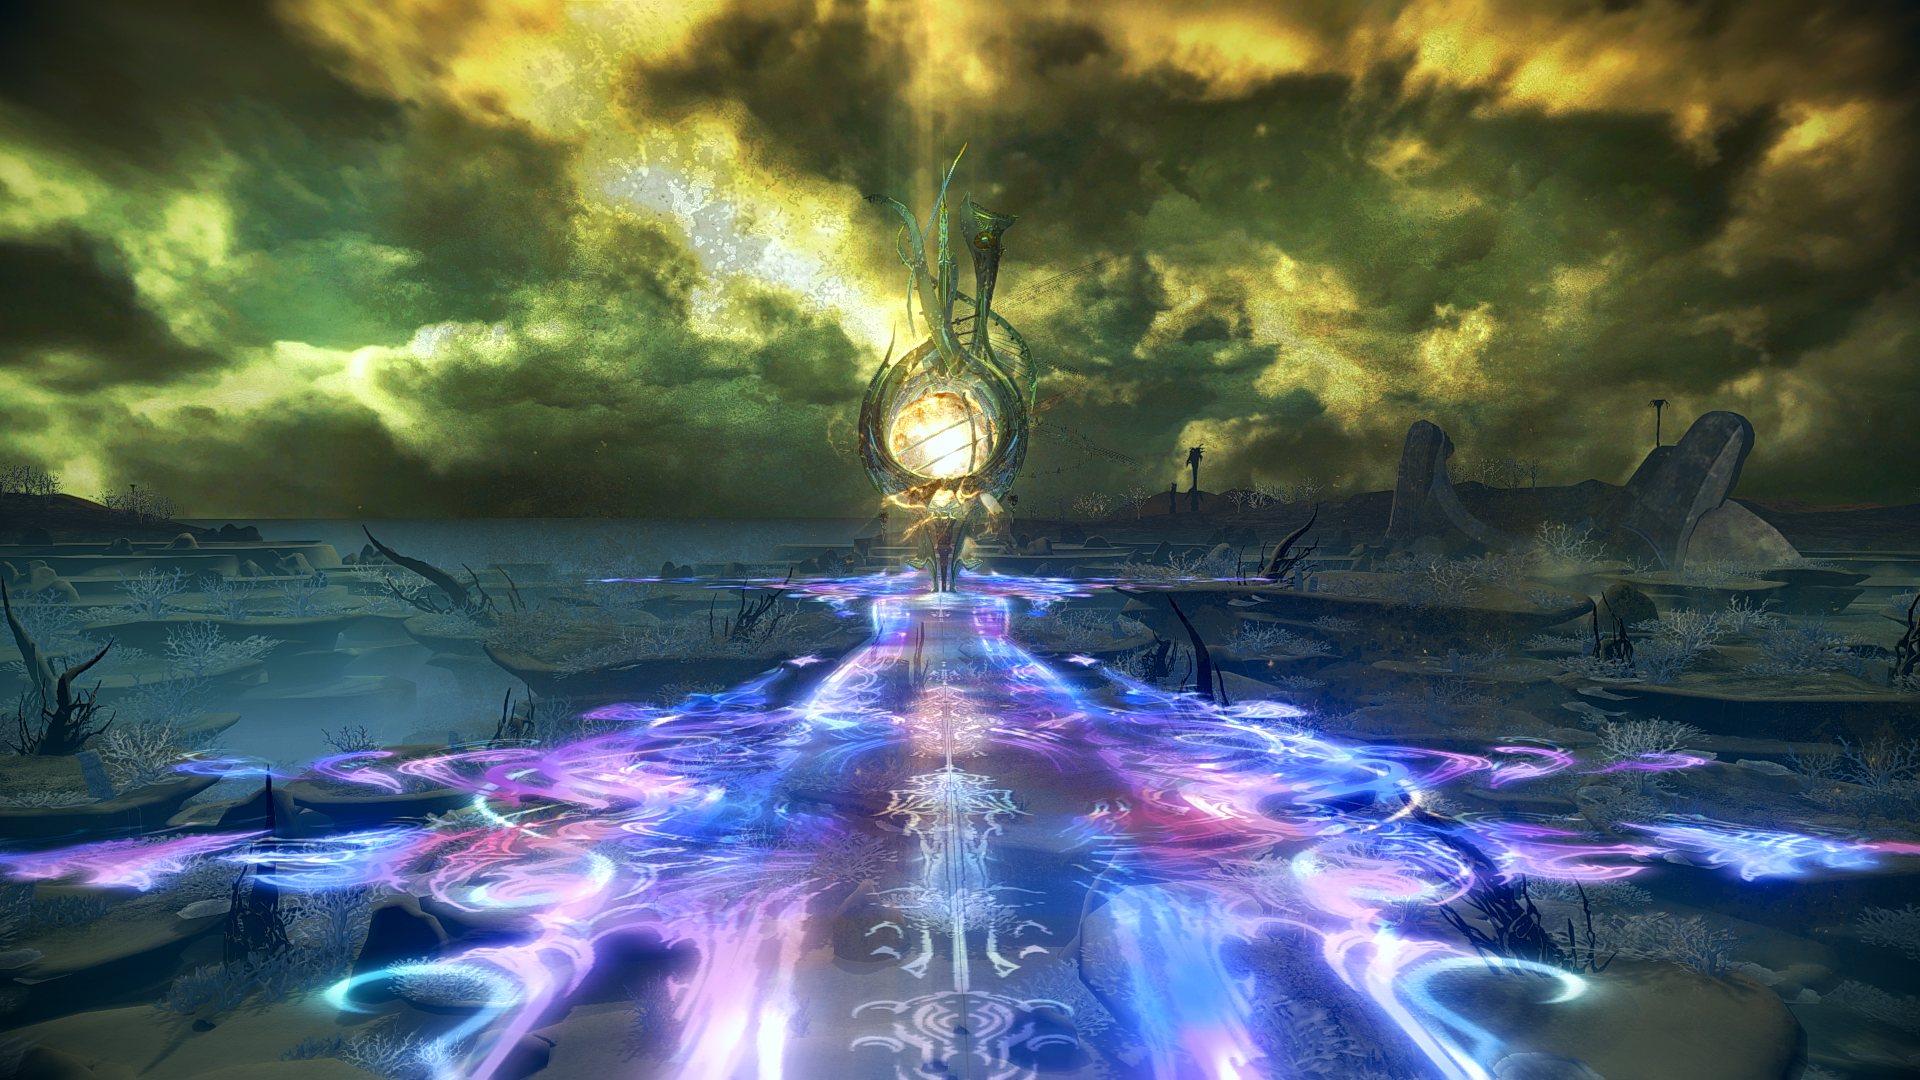 https://static.wikia.nocookie.net/finalfantasy/images/4/40/FFXIII-2_New_Bodhum_700_AF_Final_Time_Gate.png/revision/latest?cb=20160504113101